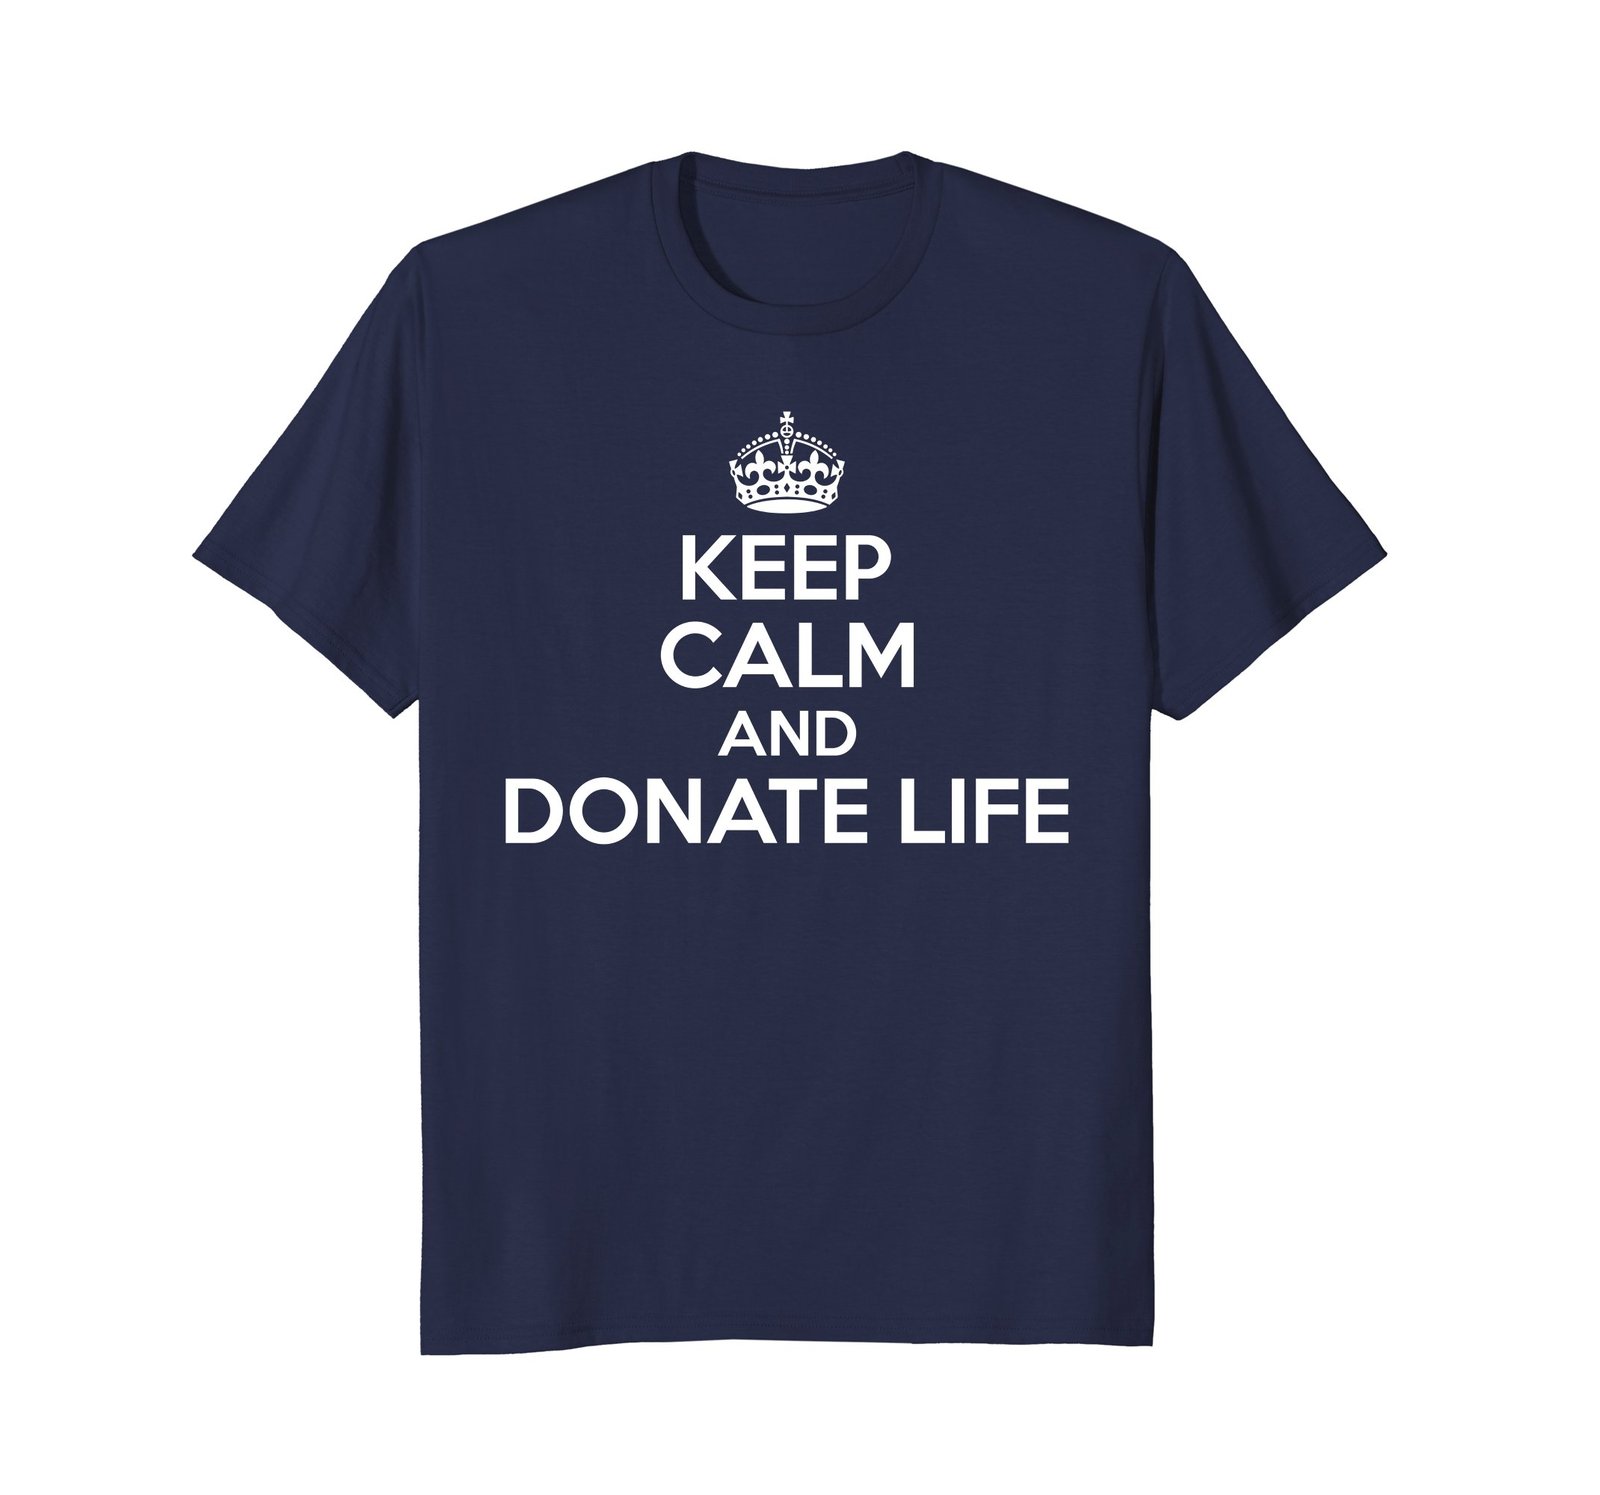 Funny Shirts - Keep Calm And Donate Life - Funny T-shirt Men